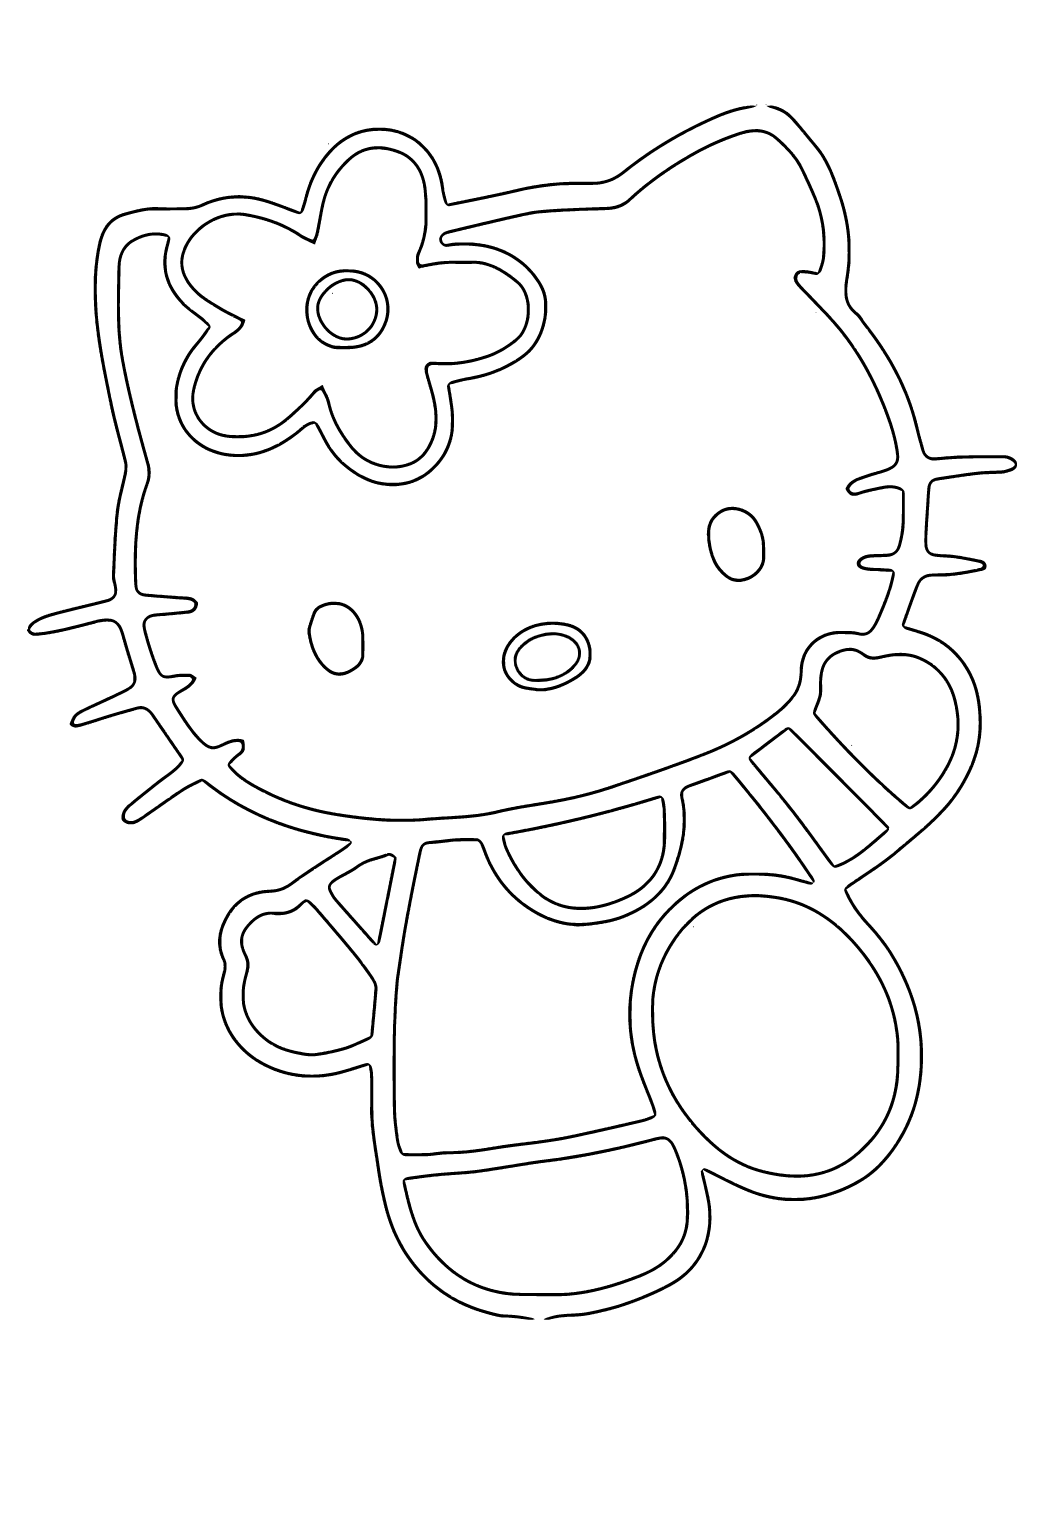 hello kitty classroom coloring page